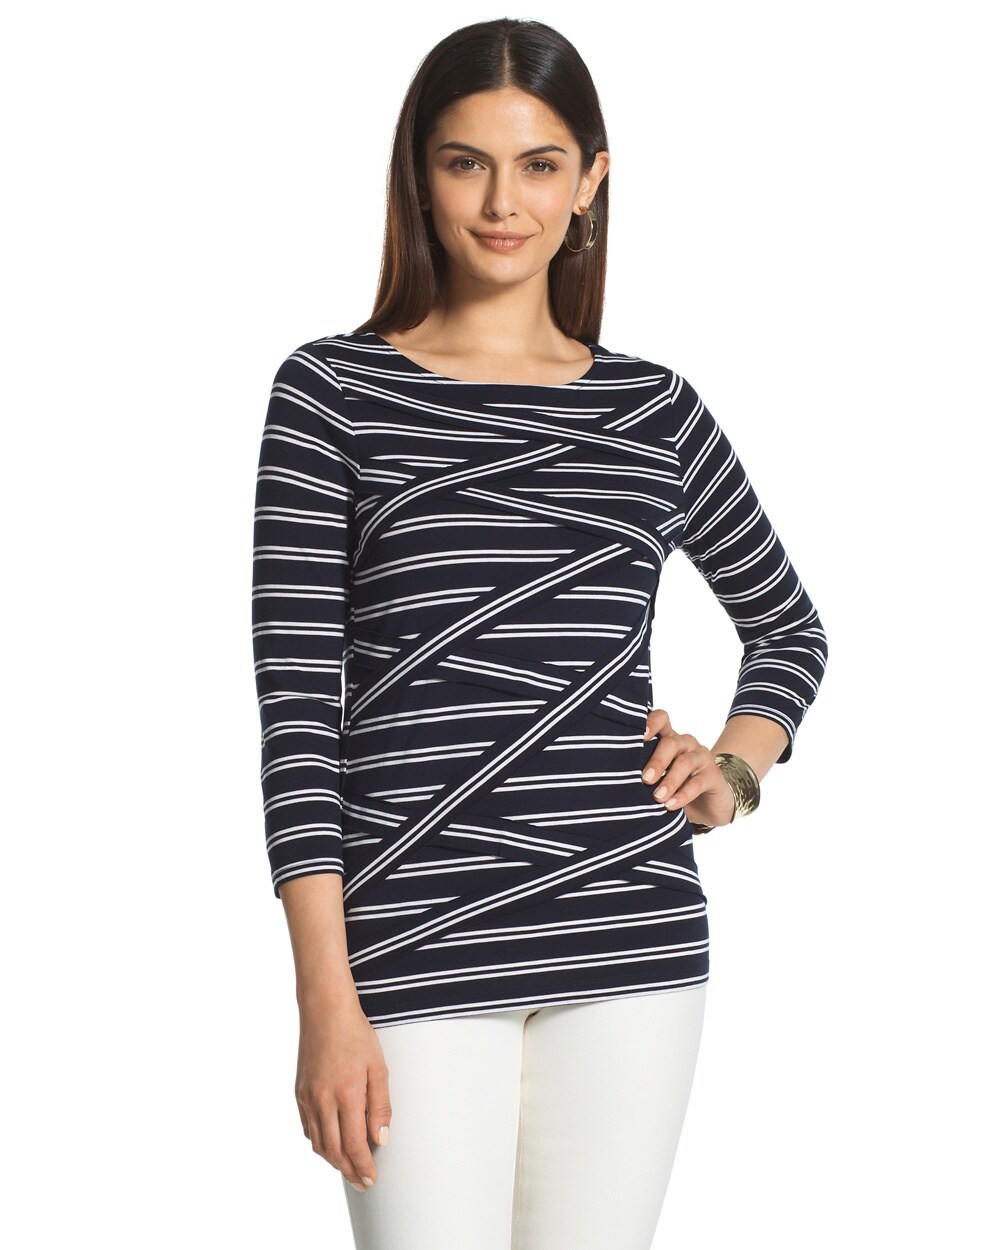 Layered Double-Stripe Top